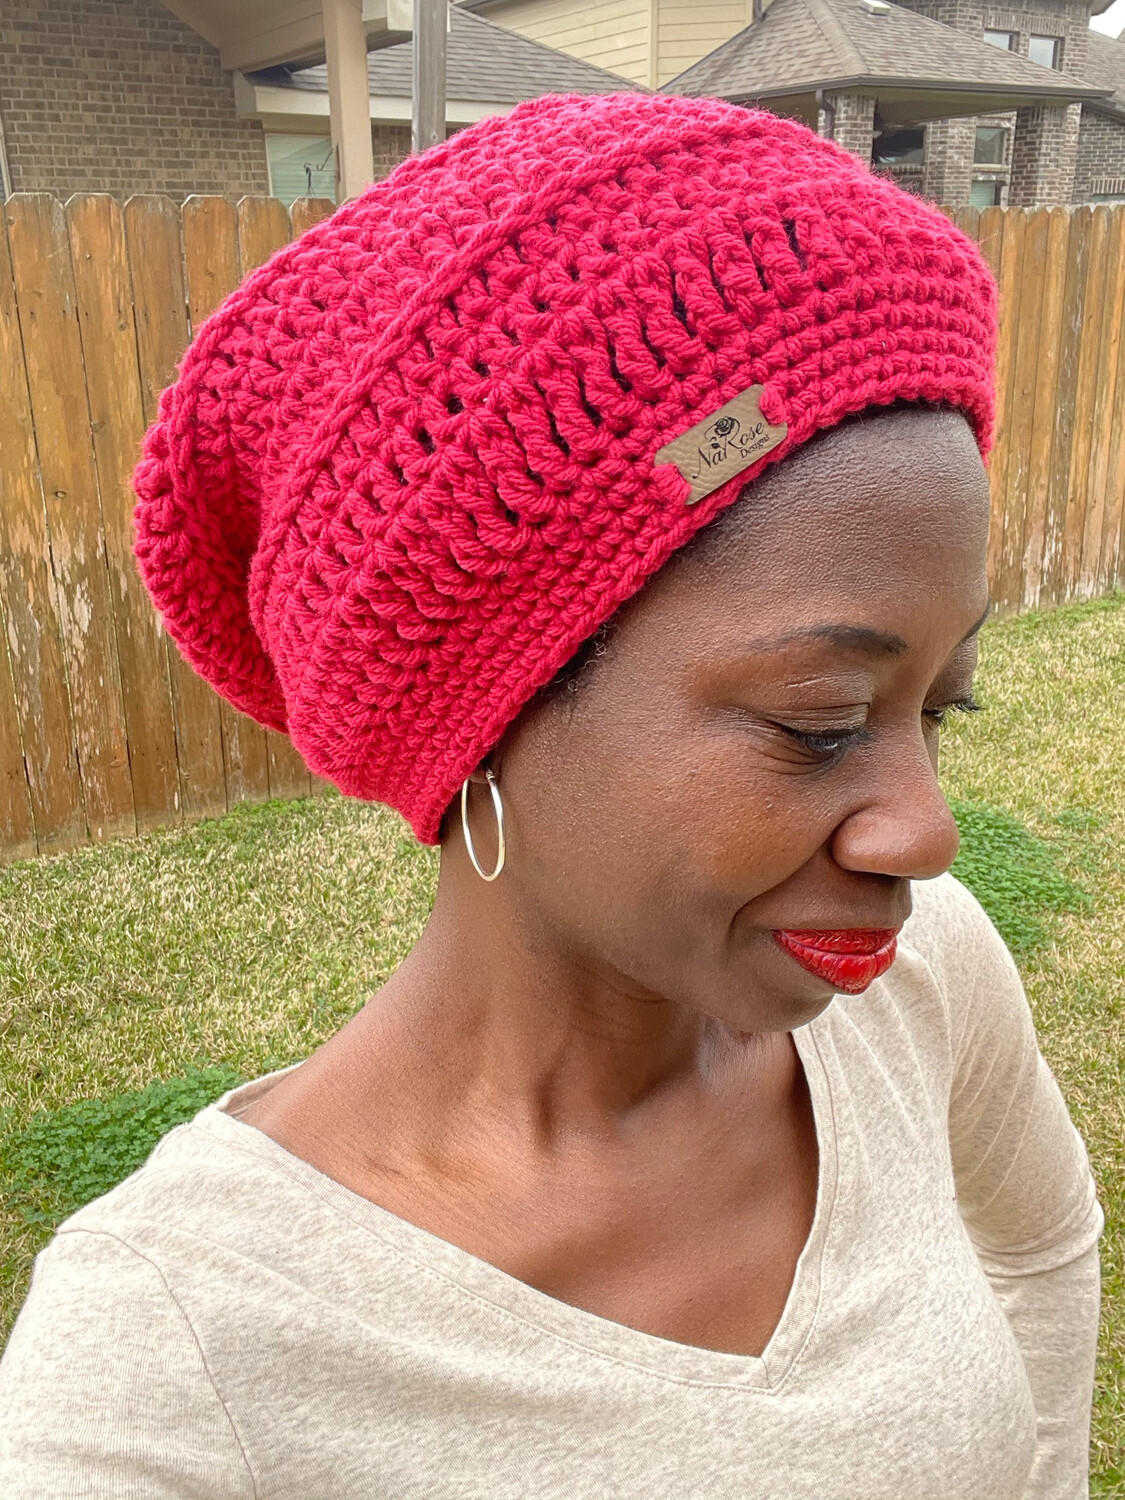 NRD Slouchy Hat - #endperiodpoverty 